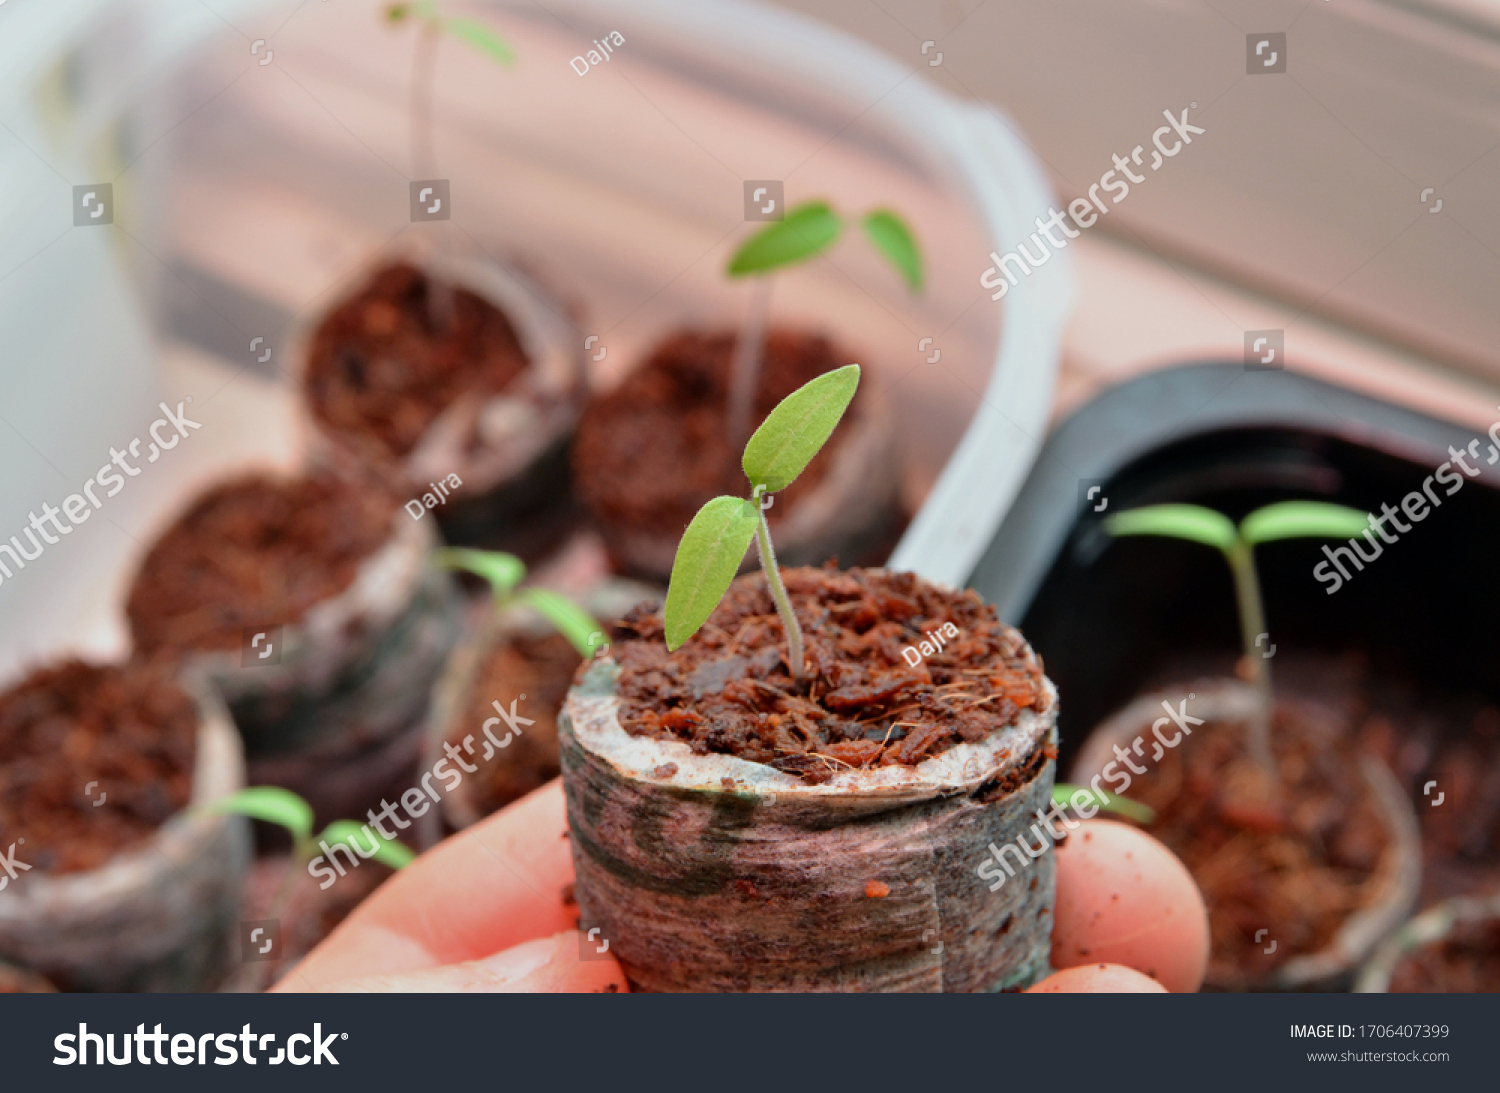 Young tomato seedling growing in a coir pellet. One week old tomato plant pot. Close up. Blur background with other tomato saplings growing in the coir pellets #1706407399